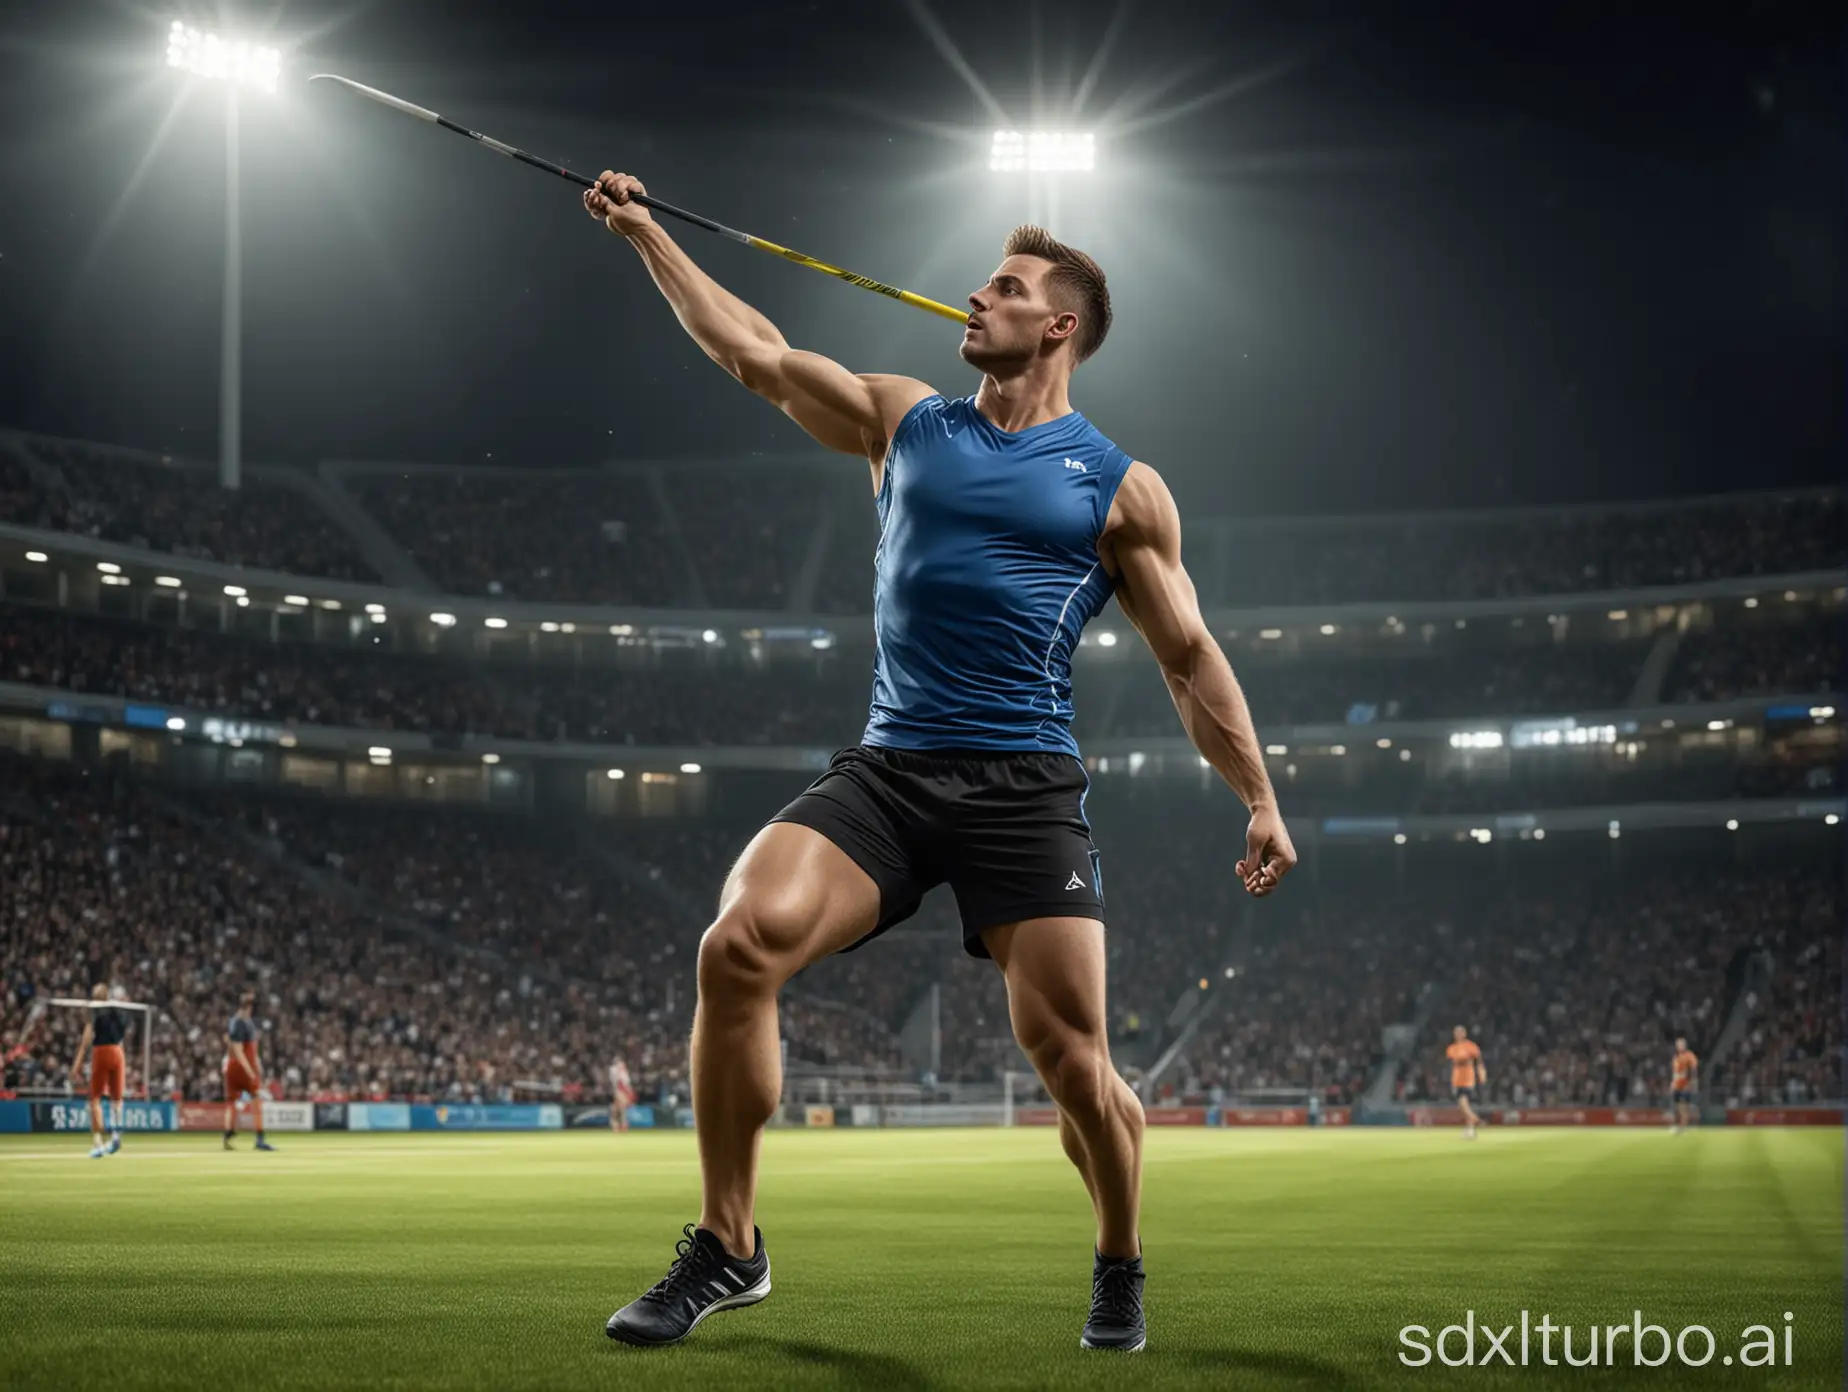 photorealistic running male javelin thrower wearing sports clothes throwing a javelin in a sports stadium at night, floodlights, grass